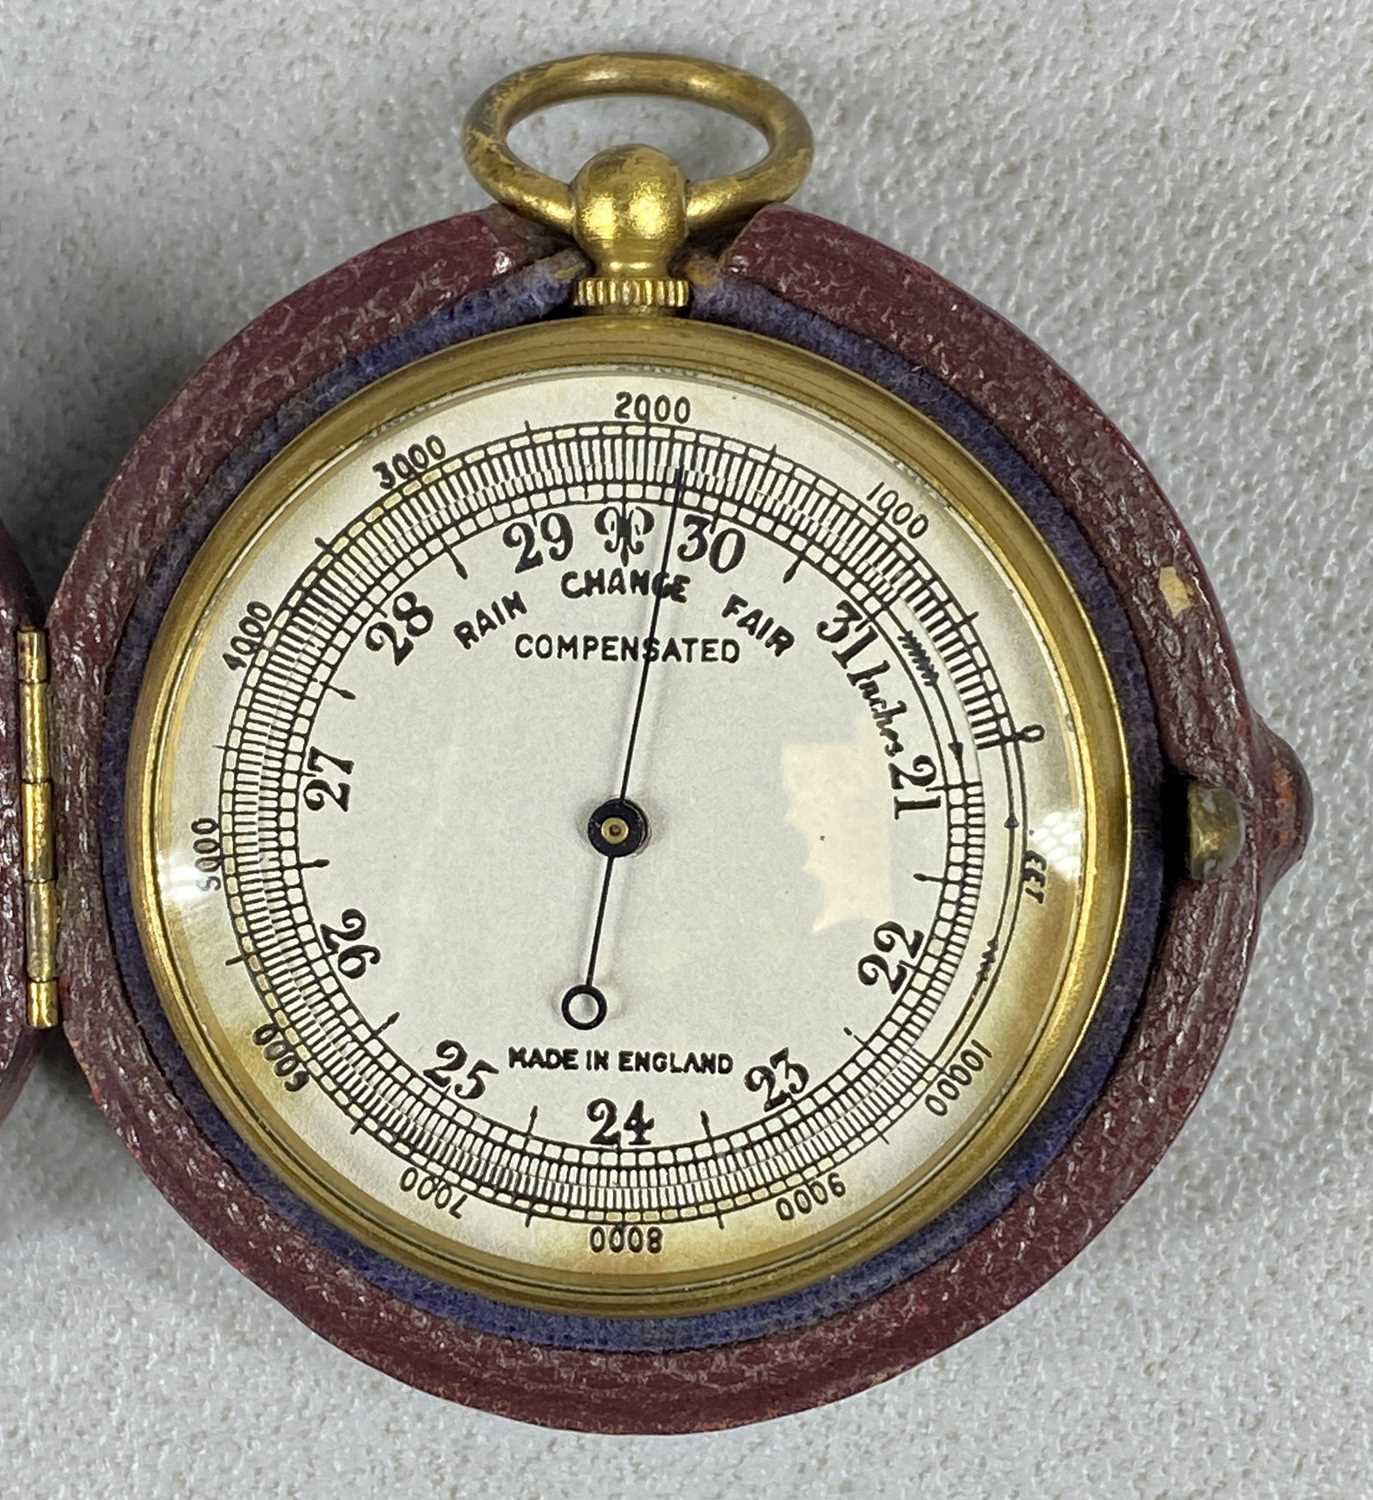 MAHOGANY CASED POCKET COMPASS, early 19th Century, the paper dial marked with quadrants of 10 degree - Image 6 of 6